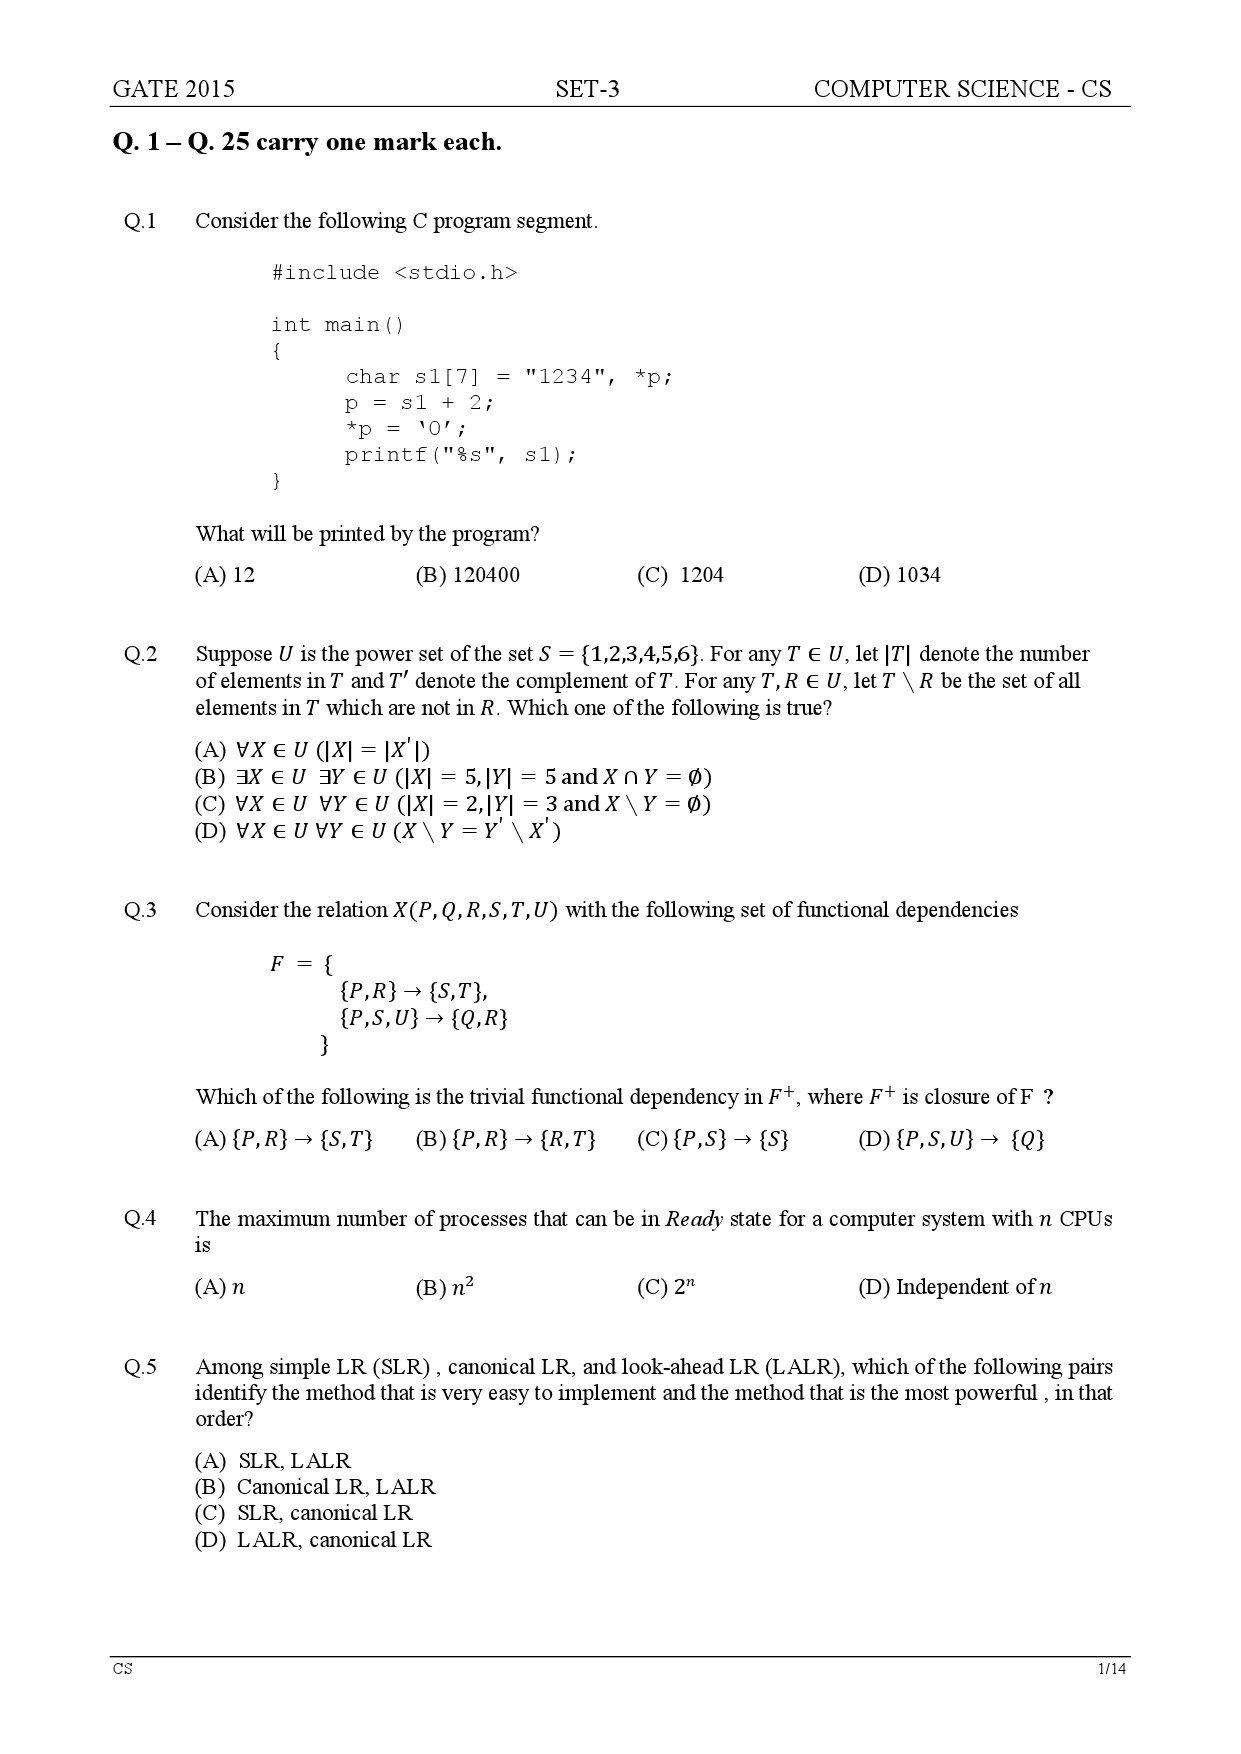 GATE Exam Question Paper 2015 Computer Science and Information Technology Set 3 1